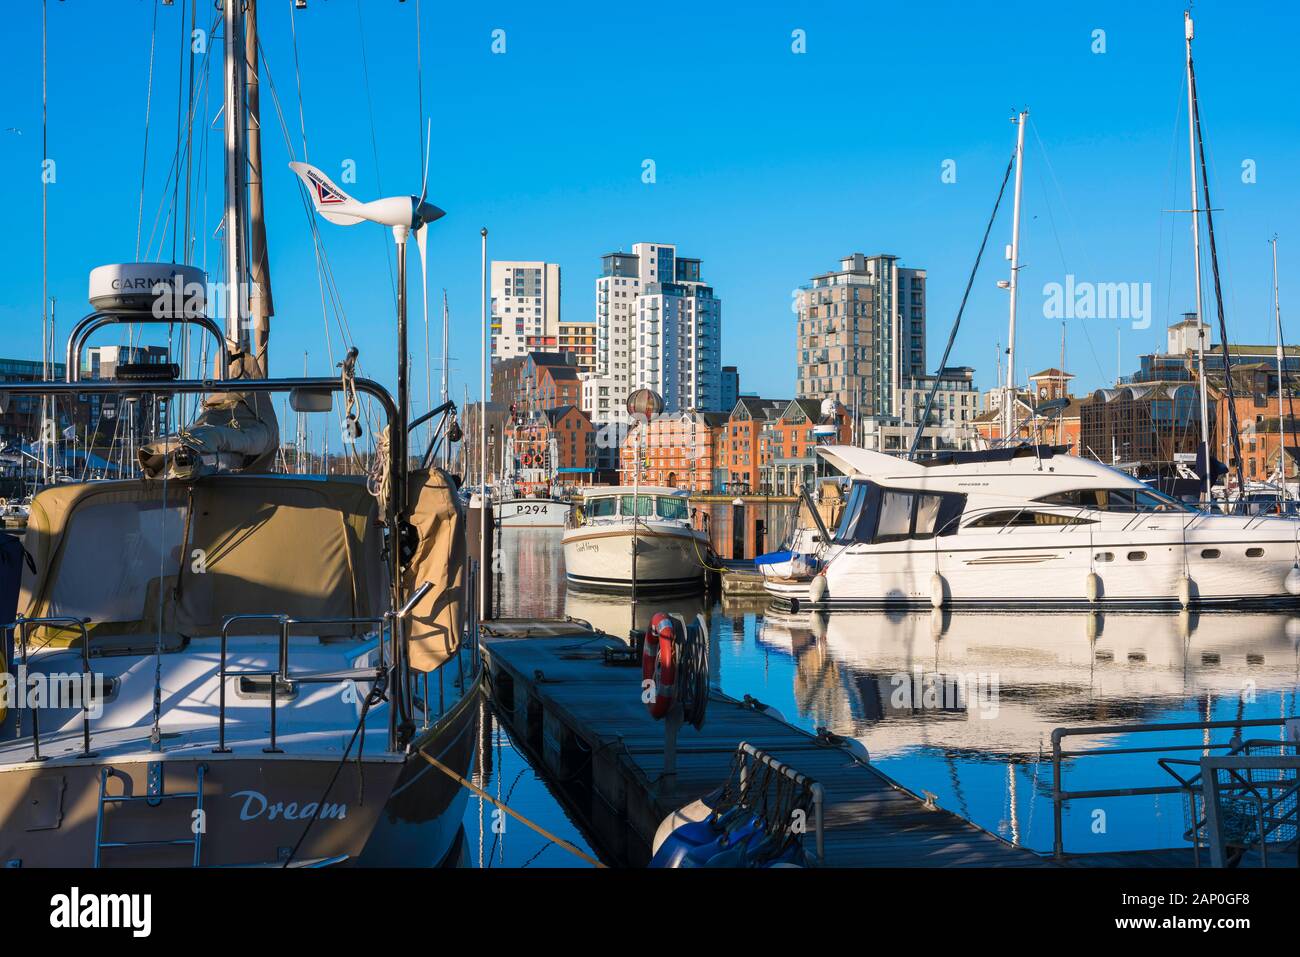 Ipswich waterfront, view of yachts and leisure craft moored in Ipswich marina with residential property in the background, Suffolk, East Anglia, UK. Stock Photo